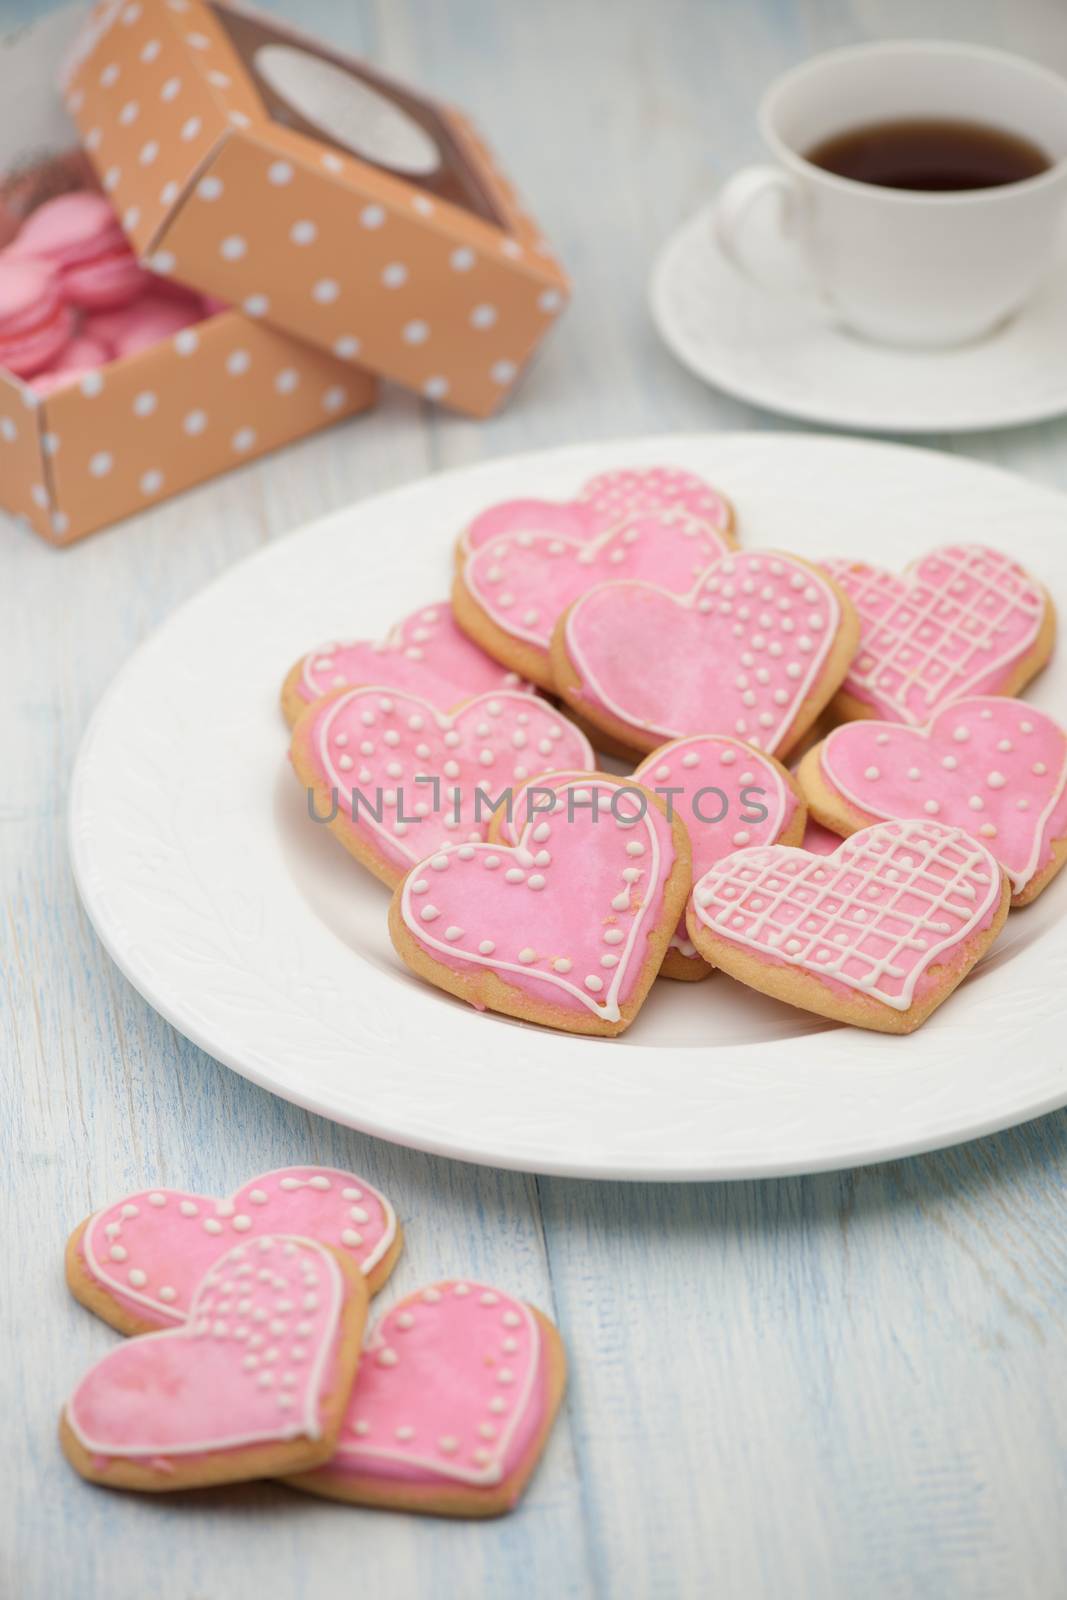 cookies in the shape of hearts on Valentine's Day by A_Karim